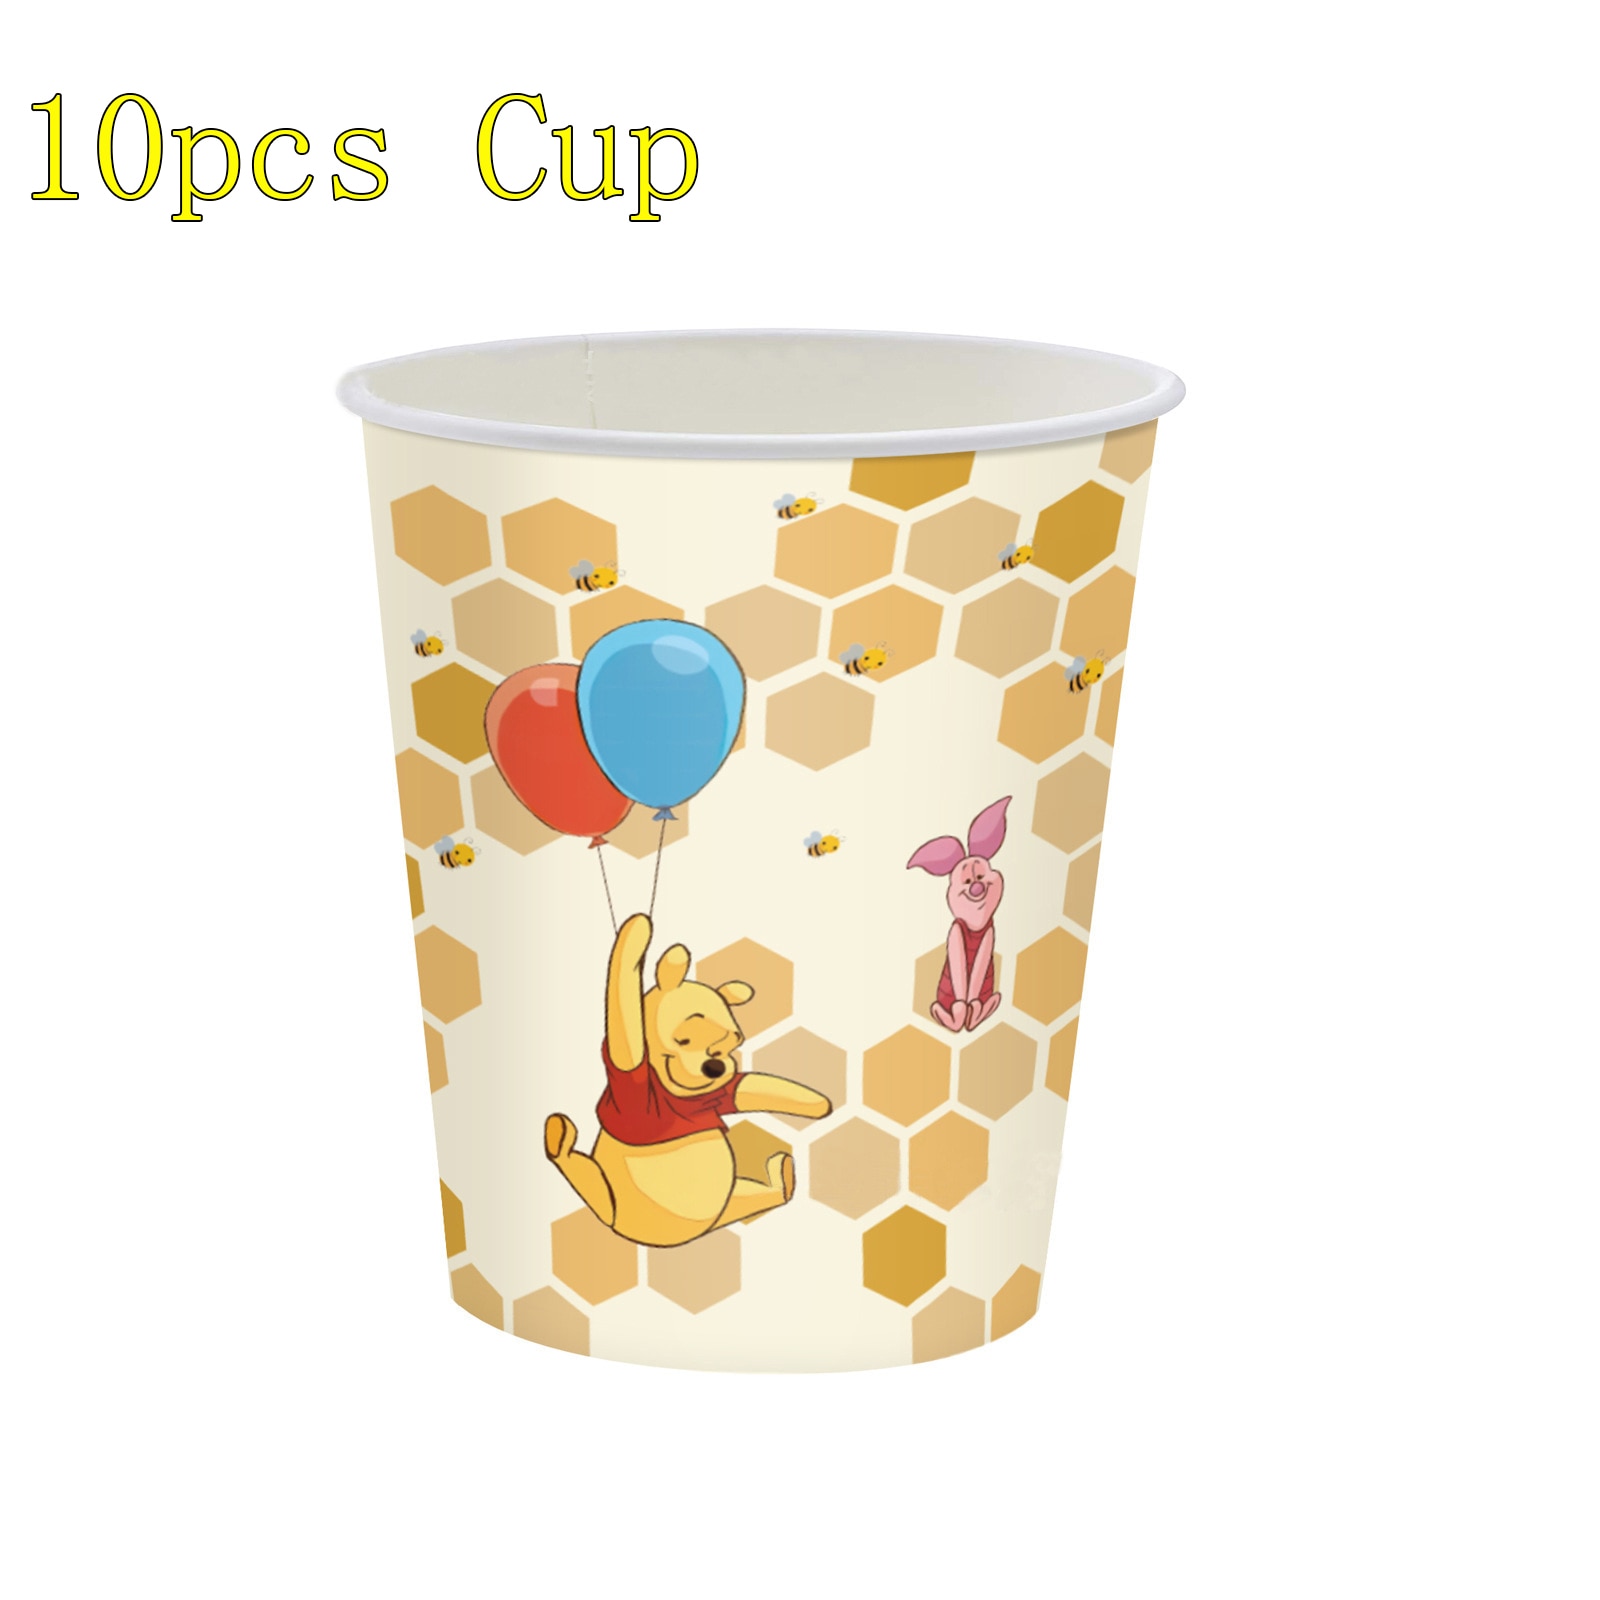 Winnie The Pooh Birthday Party Decorations Serves 10 Guests Plates Napkins Table Cover Balloons Banner For 1 - Winnie The Pooh Plush